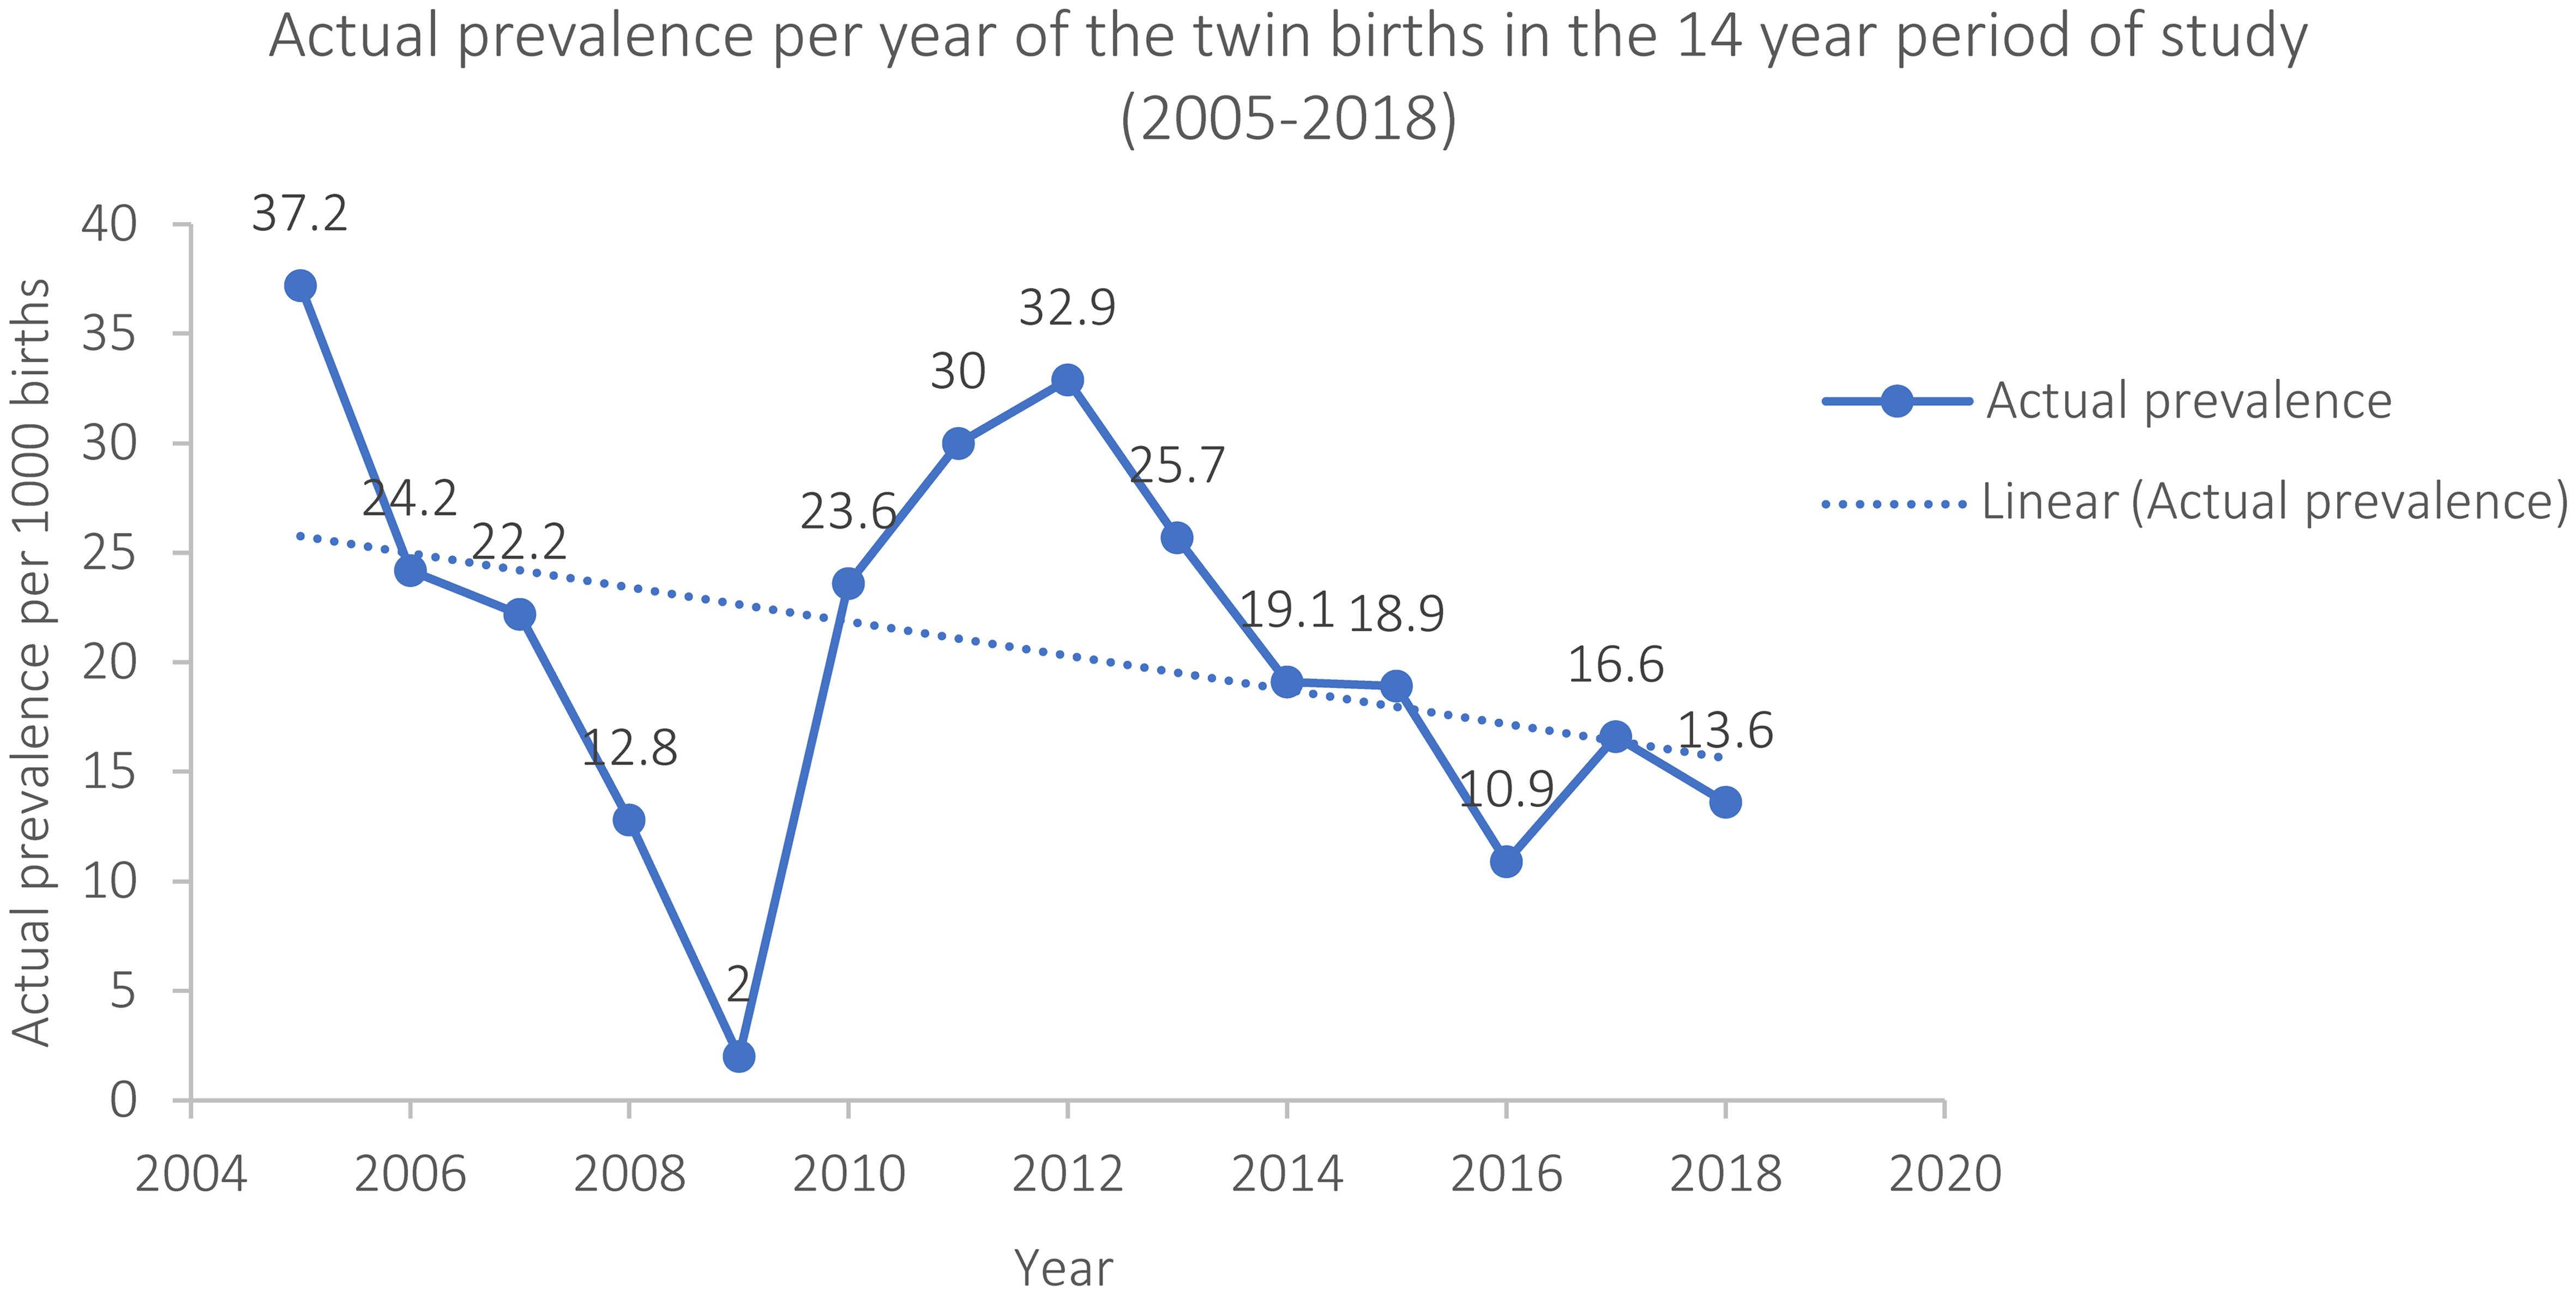 Trend of actual prevalence of twin births over the 14 years (2005–2018).